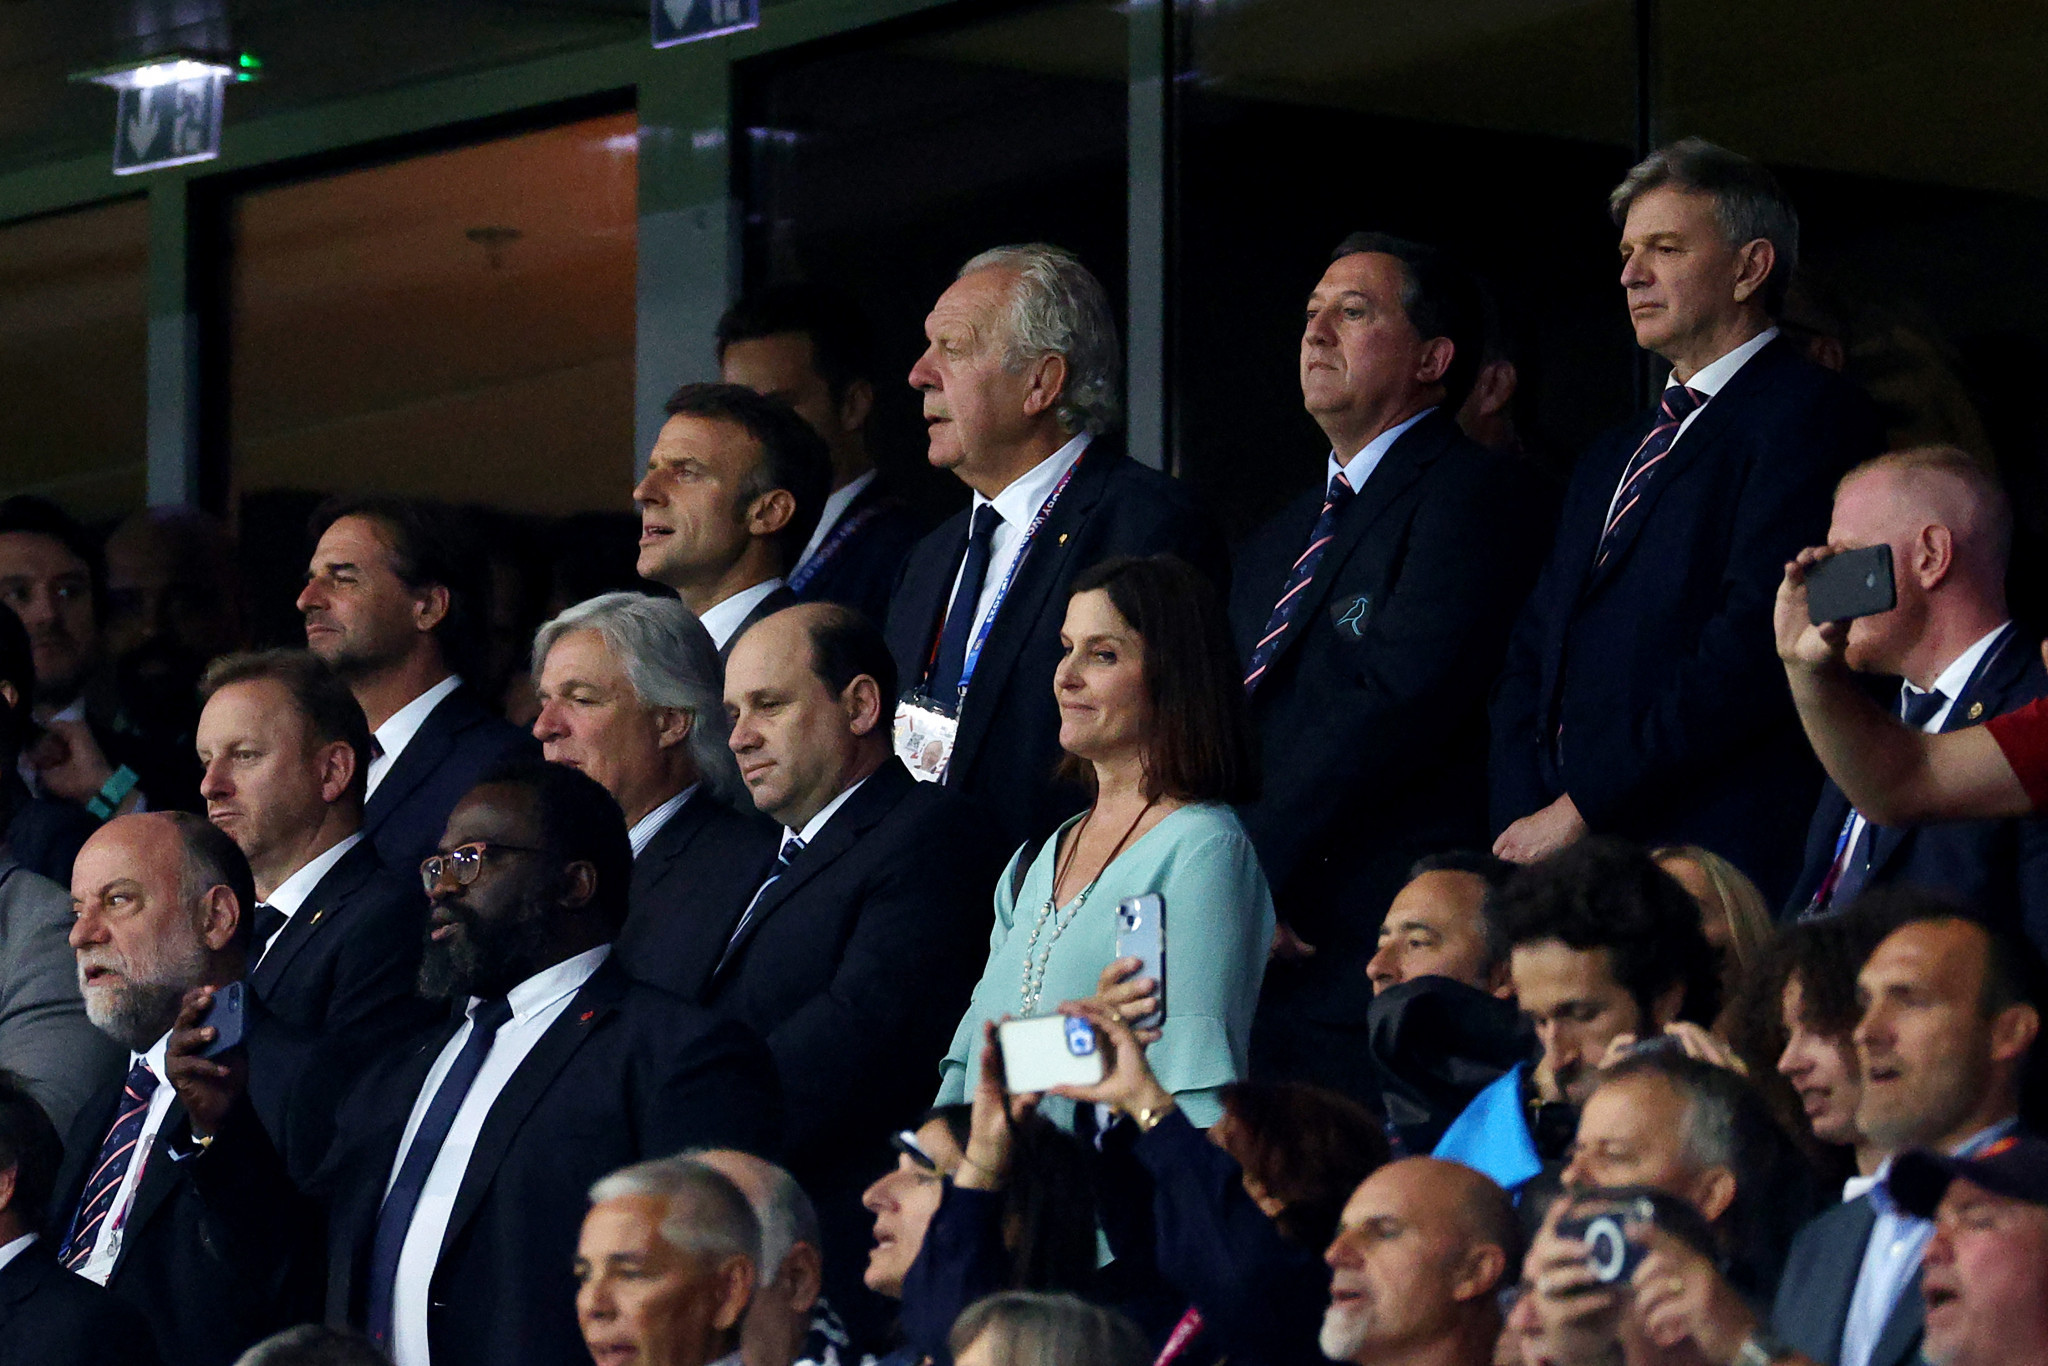 French President Emmanuel Macron watches the match alongside World Rugby President Sir Bill Beaumont ©Getty Images